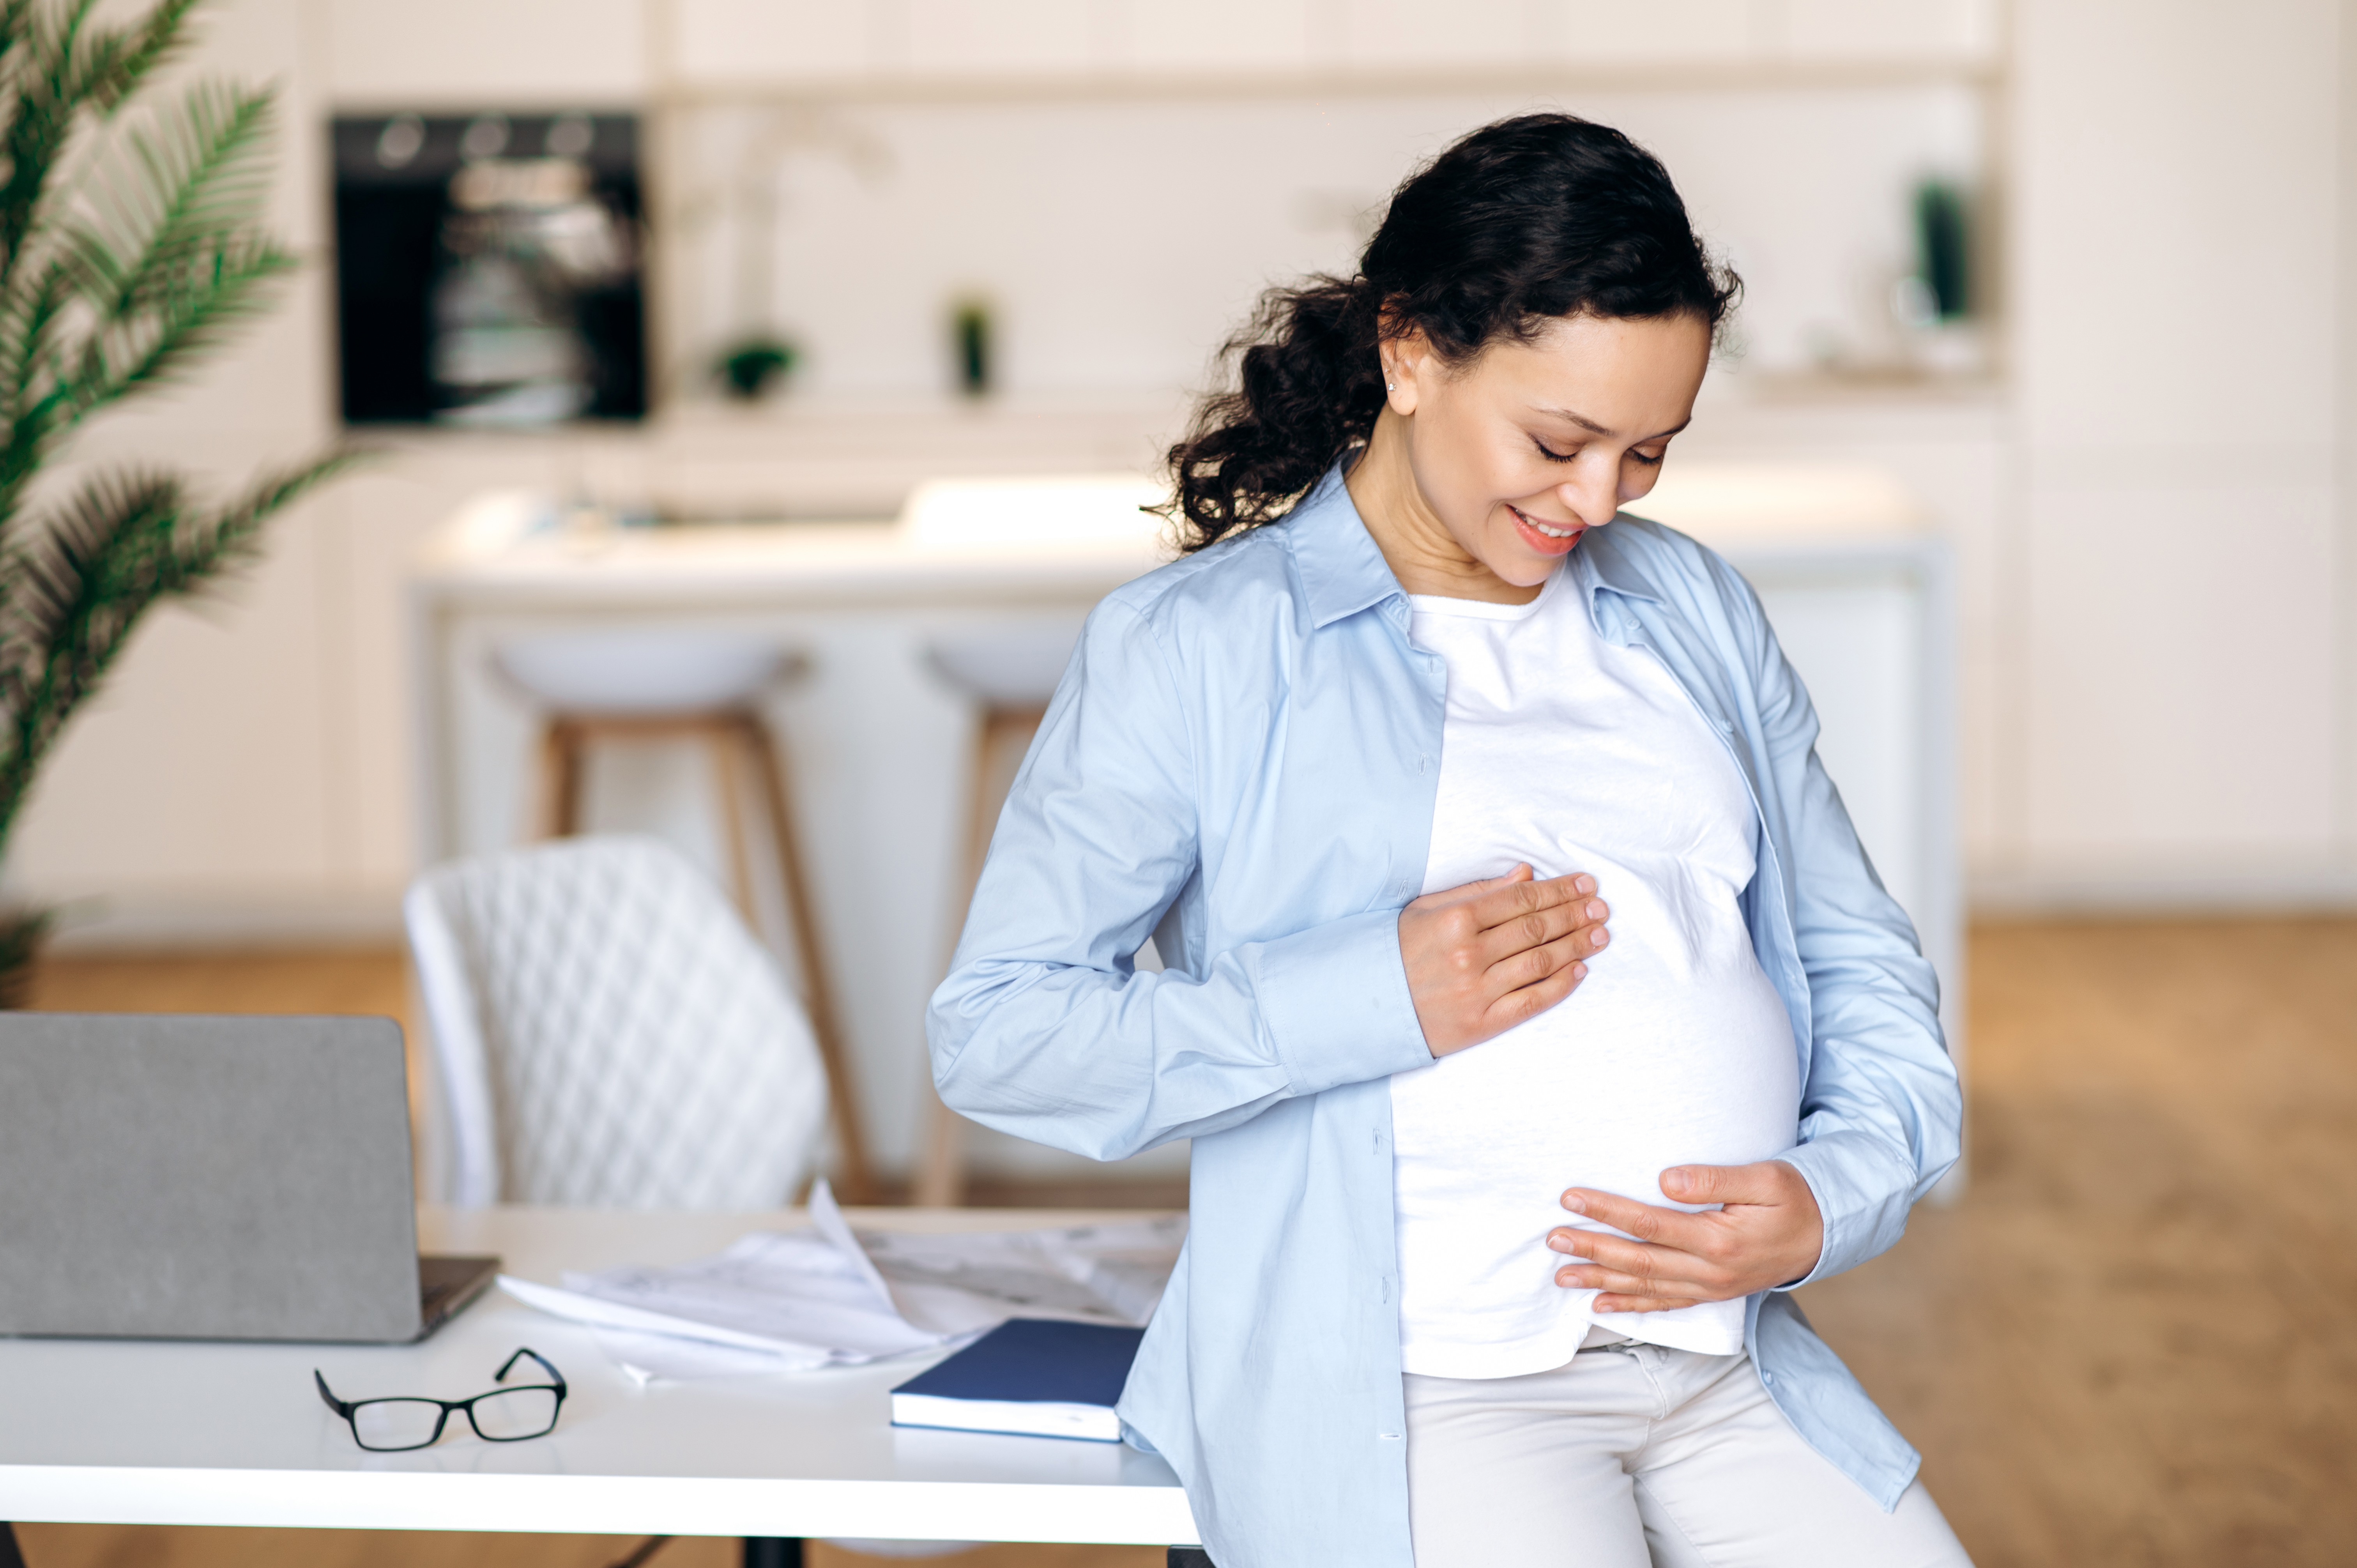 Pregnancy Discrimination in the workplace - Do's and Don't